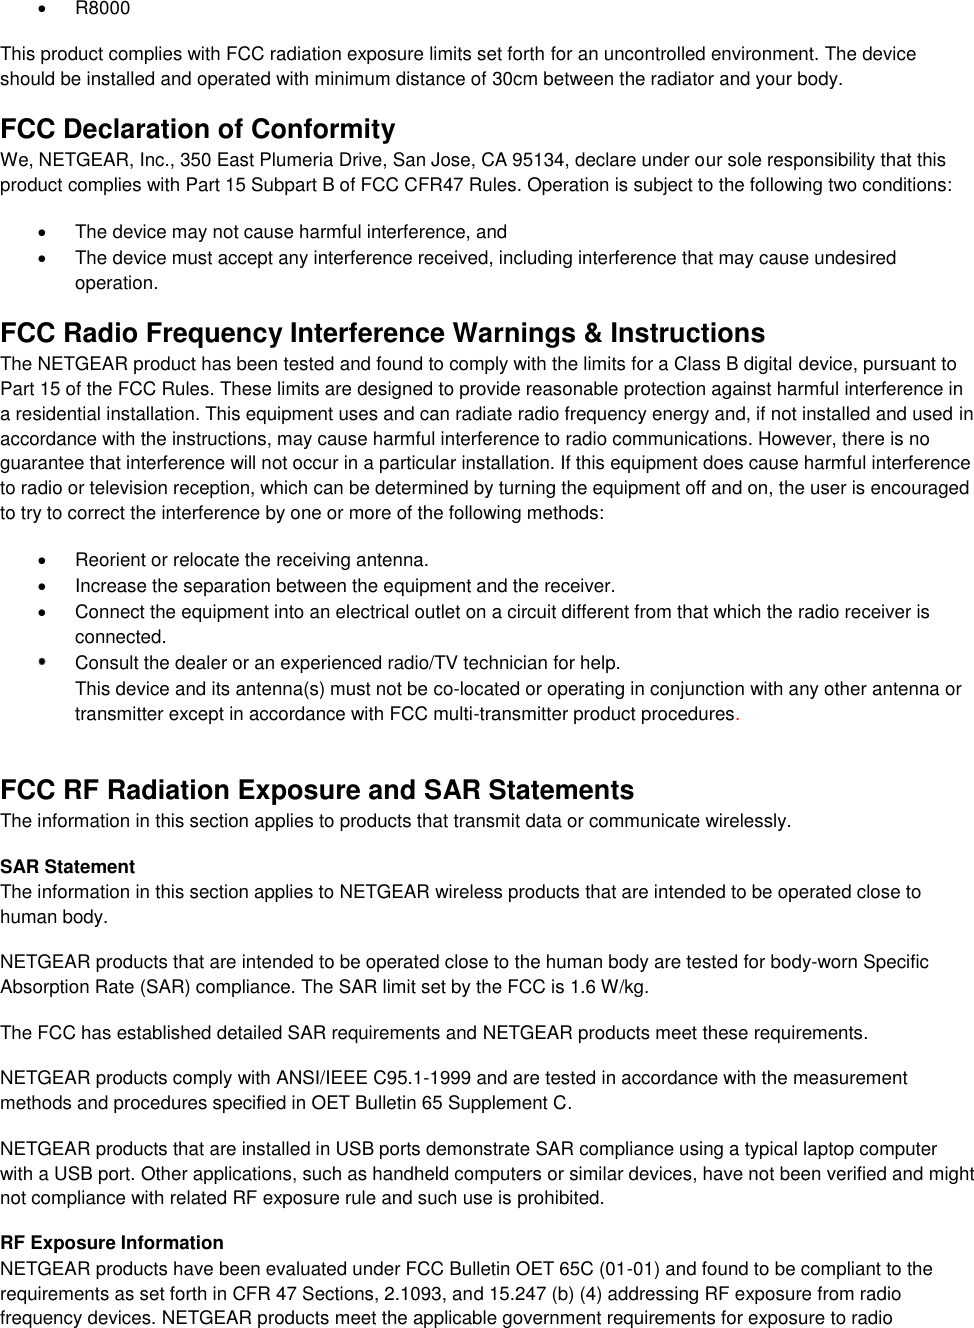    R8000 This product complies with FCC radiation exposure limits set forth for an uncontrolled environment. The device should be installed and operated with minimum distance of 30cm between the radiator and your body. FCC Declaration of Conformity We, NETGEAR, Inc., 350 East Plumeria Drive, San Jose, CA 95134, declare under our sole responsibility that this product complies with Part 15 Subpart B of FCC CFR47 Rules. Operation is subject to the following two conditions:   The device may not cause harmful interference, and   The device must accept any interference received, including interference that may cause undesired operation. FCC Radio Frequency Interference Warnings &amp; Instructions The NETGEAR product has been tested and found to comply with the limits for a Class B digital device, pursuant to Part 15 of the FCC Rules. These limits are designed to provide reasonable protection against harmful interference in a residential installation. This equipment uses and can radiate radio frequency energy and, if not installed and used in accordance with the instructions, may cause harmful interference to radio communications. However, there is no guarantee that interference will not occur in a particular installation. If this equipment does cause harmful interference to radio or television reception, which can be determined by turning the equipment off and on, the user is encouraged to try to correct the interference by one or more of the following methods:   Reorient or relocate the receiving antenna.   Increase the separation between the equipment and the receiver.   Connect the equipment into an electrical outlet on a circuit different from that which the radio receiver is connected.  Consult the dealer or an experienced radio/TV technician for help.  This device and its antenna(s) must not be co-located or operating in conjunction with any other antenna or transmitter except in accordance with FCC multi-transmitter product procedures.     FCC RF Radiation Exposure and SAR Statements The information in this section applies to products that transmit data or communicate wirelessly. SAR Statement The information in this section applies to NETGEAR wireless products that are intended to be operated close to human body.  NETGEAR products that are intended to be operated close to the human body are tested for body-worn Specific Absorption Rate (SAR) compliance. The SAR limit set by the FCC is 1.6 W/kg. The FCC has established detailed SAR requirements and NETGEAR products meet these requirements. NETGEAR products comply with ANSI/IEEE C95.1-1999 and are tested in accordance with the measurement methods and procedures specified in OET Bulletin 65 Supplement C. NETGEAR products that are installed in USB ports demonstrate SAR compliance using a typical laptop computer with a USB port. Other applications, such as handheld computers or similar devices, have not been verified and might not compliance with related RF exposure rule and such use is prohibited. RF Exposure Information NETGEAR products have been evaluated under FCC Bulletin OET 65C (01-01) and found to be compliant to the requirements as set forth in CFR 47 Sections, 2.1093, and 15.247 (b) (4) addressing RF exposure from radio frequency devices. NETGEAR products meet the applicable government requirements for exposure to radio 